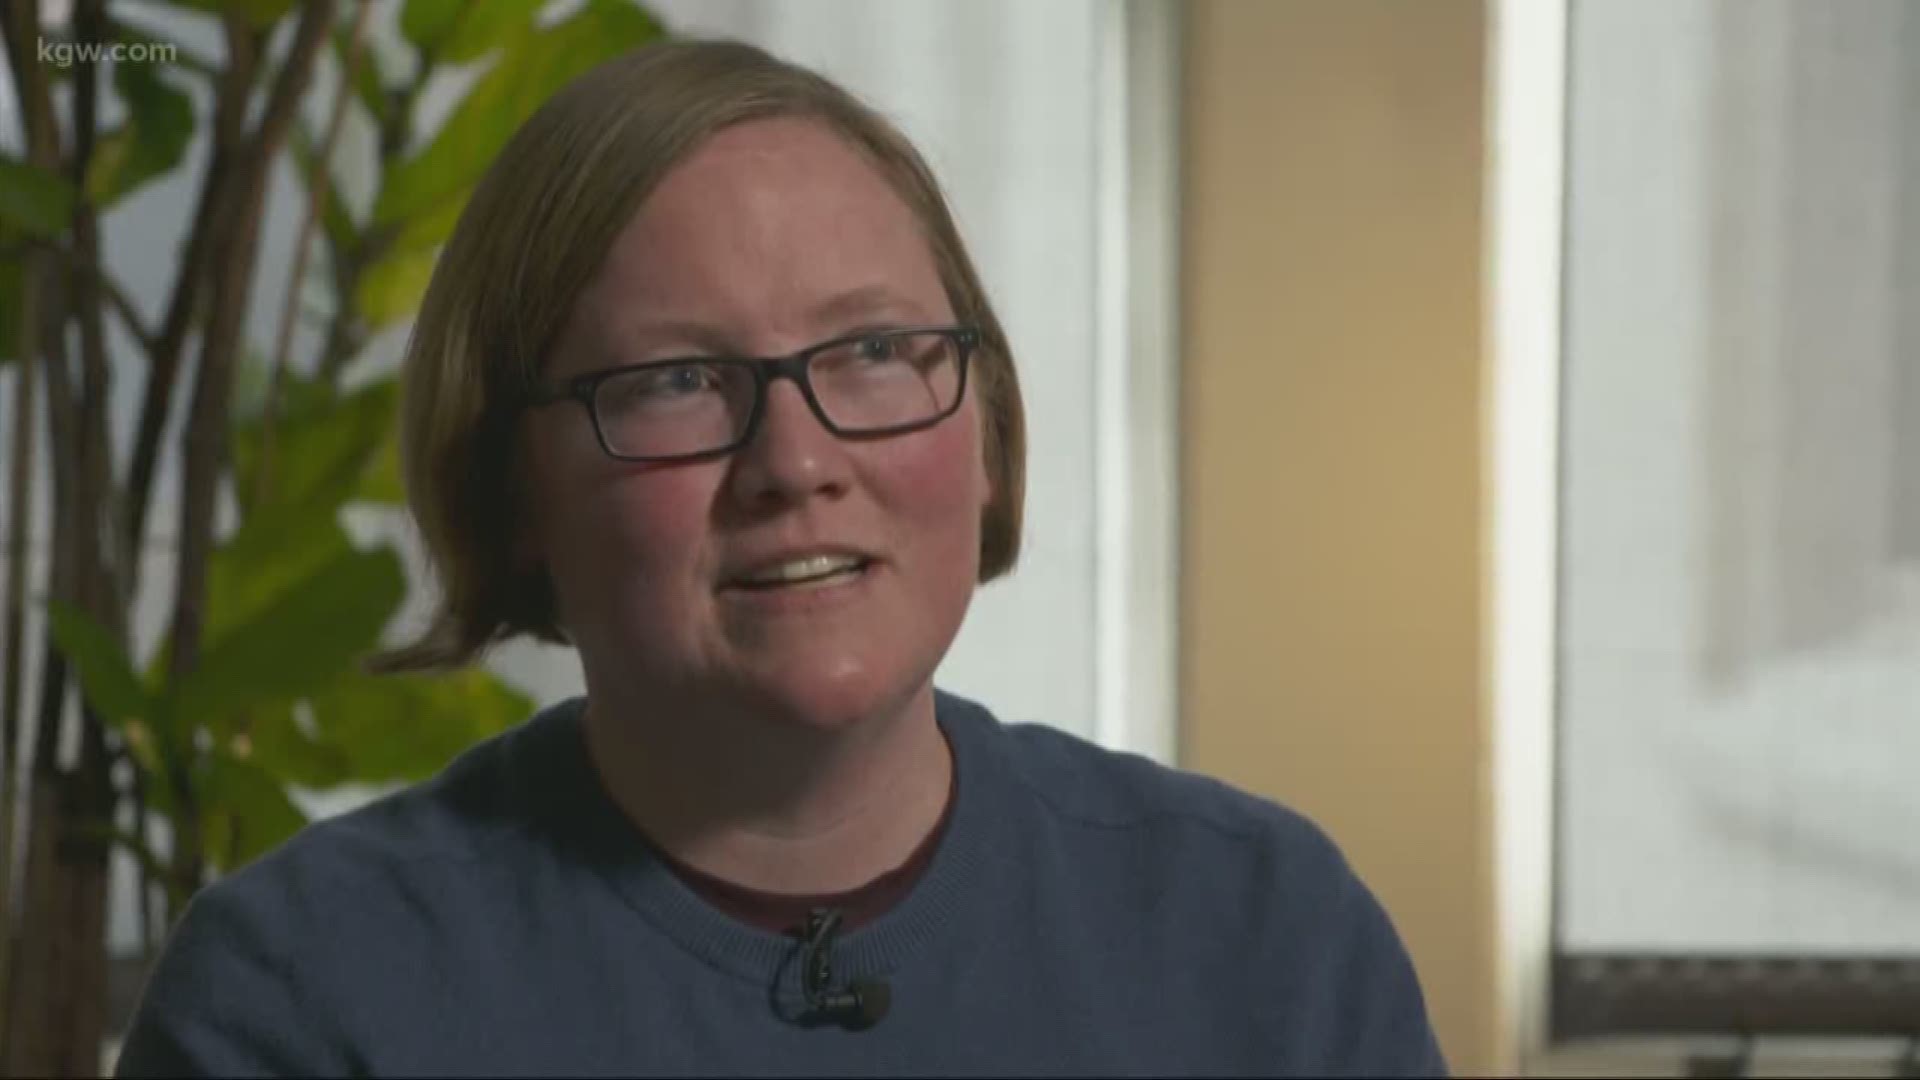 The Portland woman's health scare is similar to the reports of tourists who got sick at Mexico resorts in 2017 and 2018 due to possibly tainted alcohol. “It’s baffling,” said Angela Glass of Portland. “I’ve pieced together everything that’s happened. There’s no answer.”